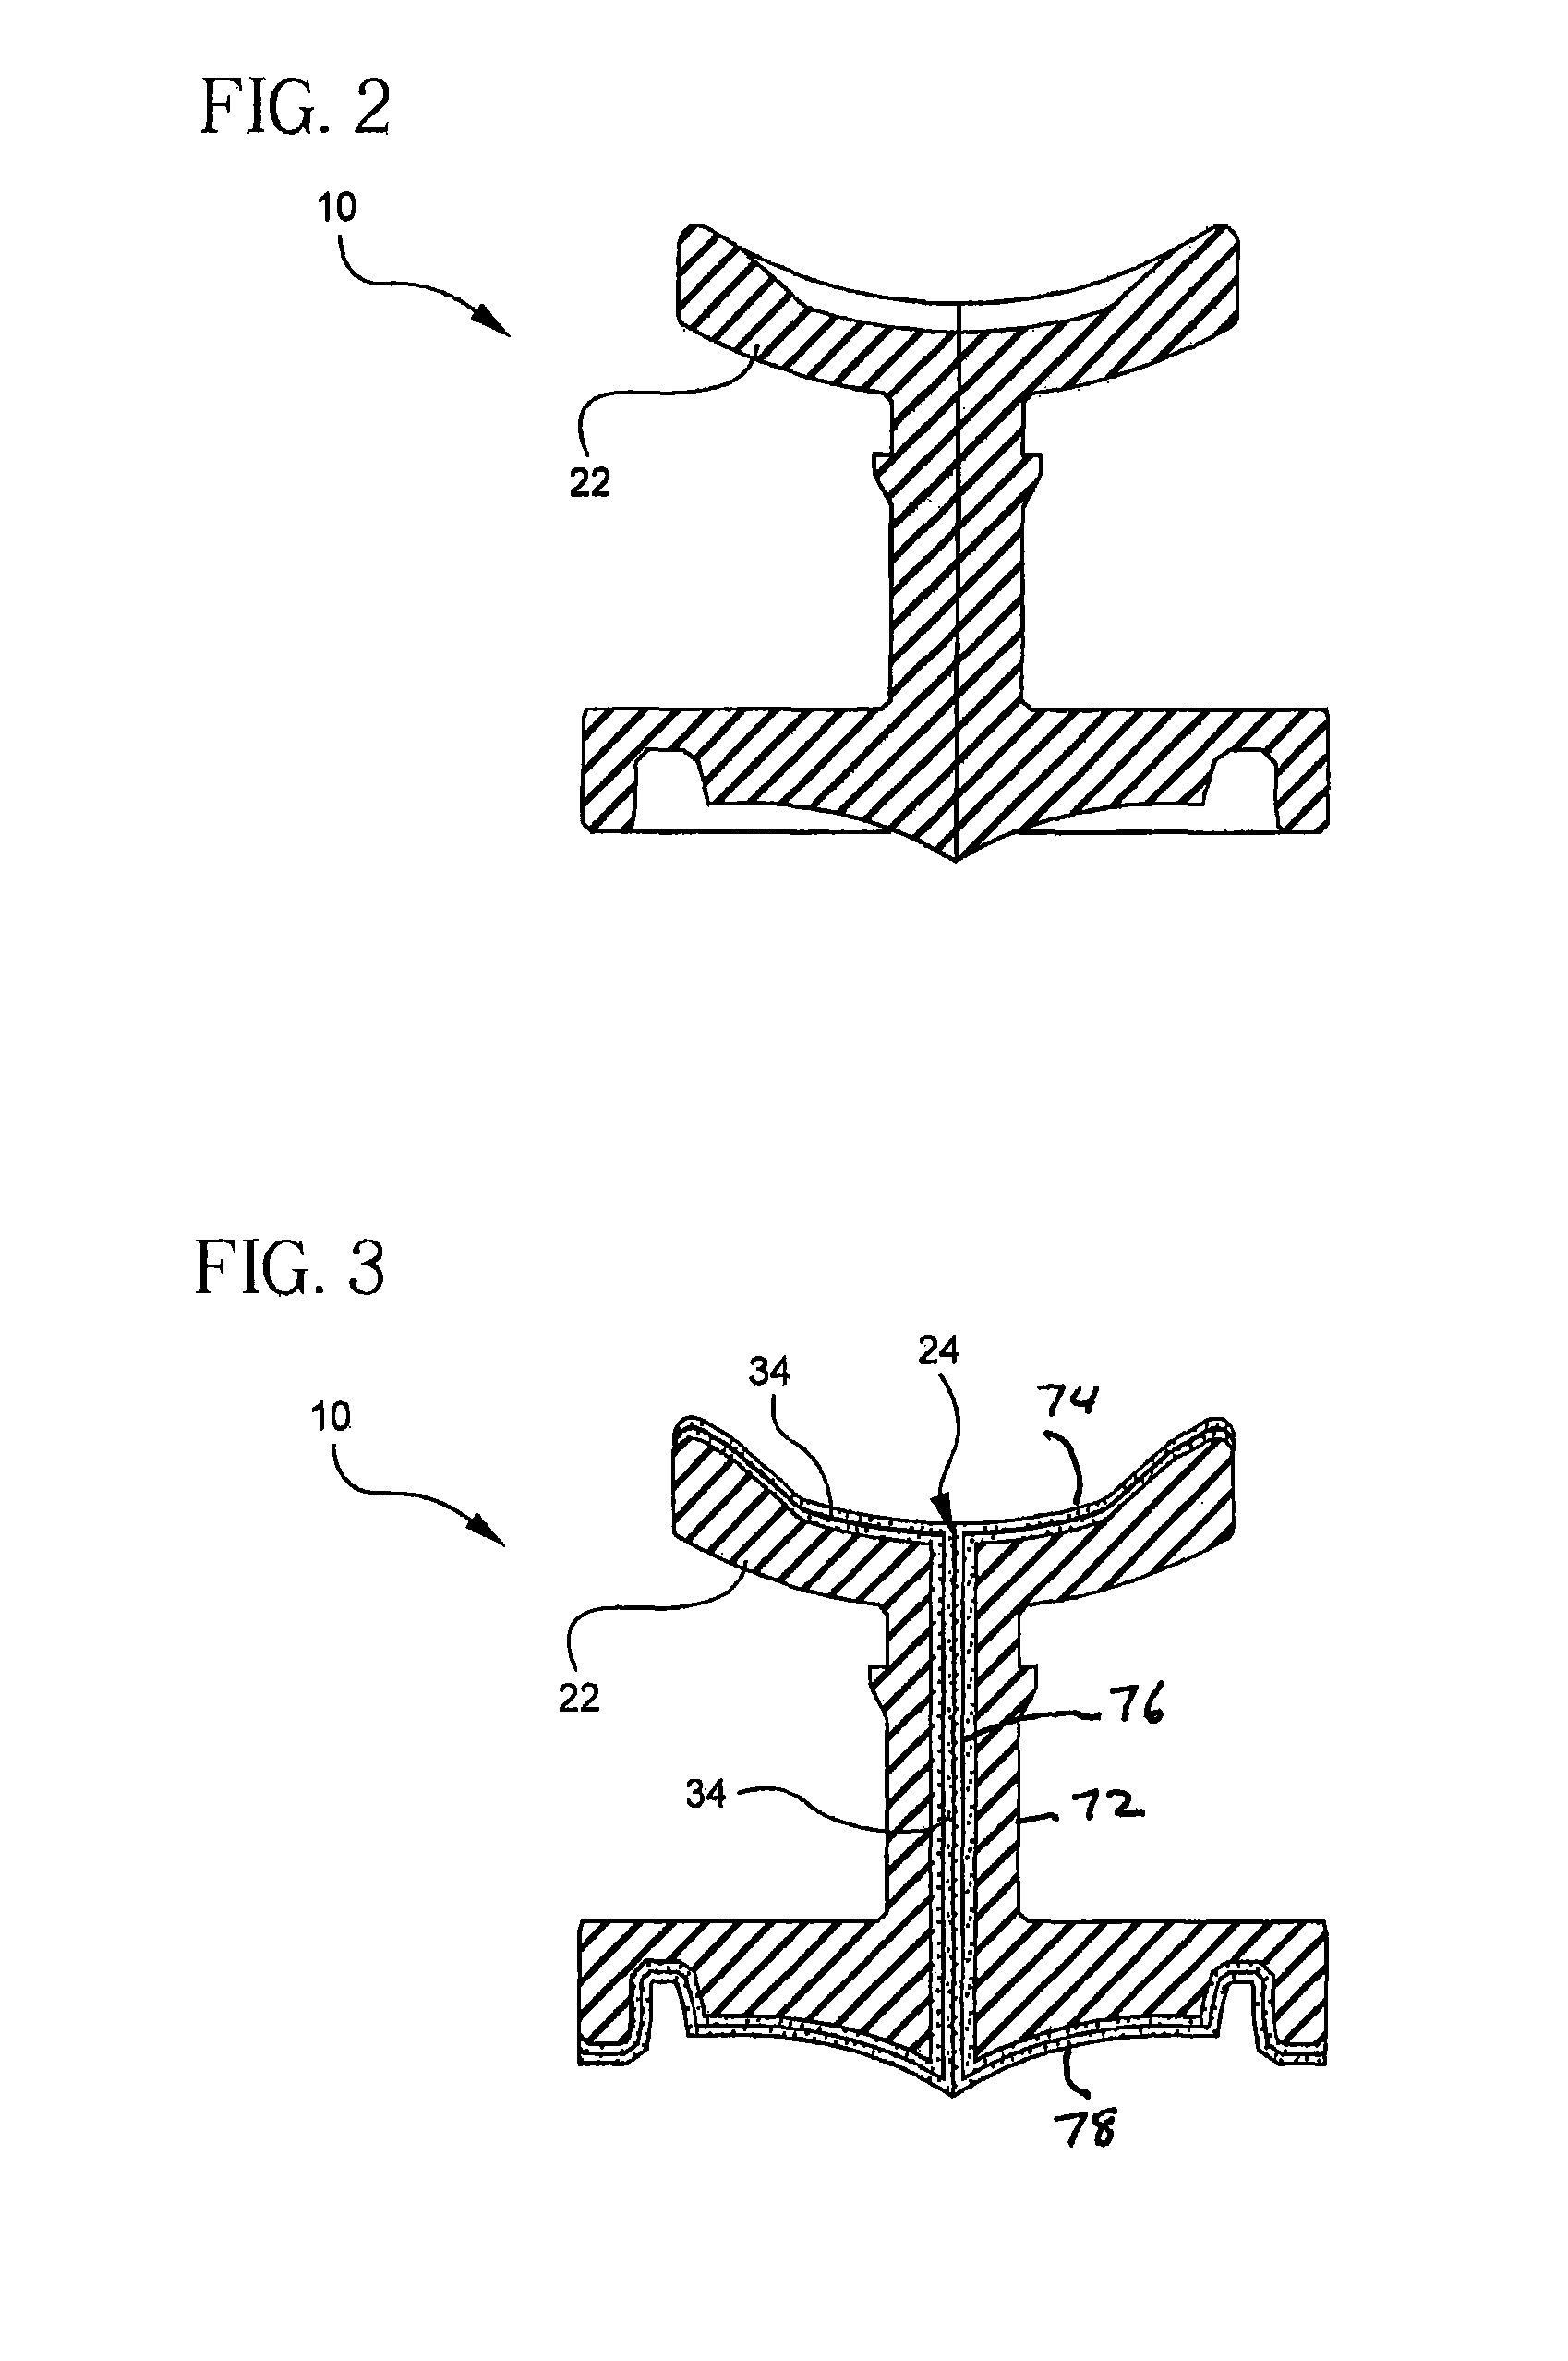 Vascular access device antimicrobial materials and solutions